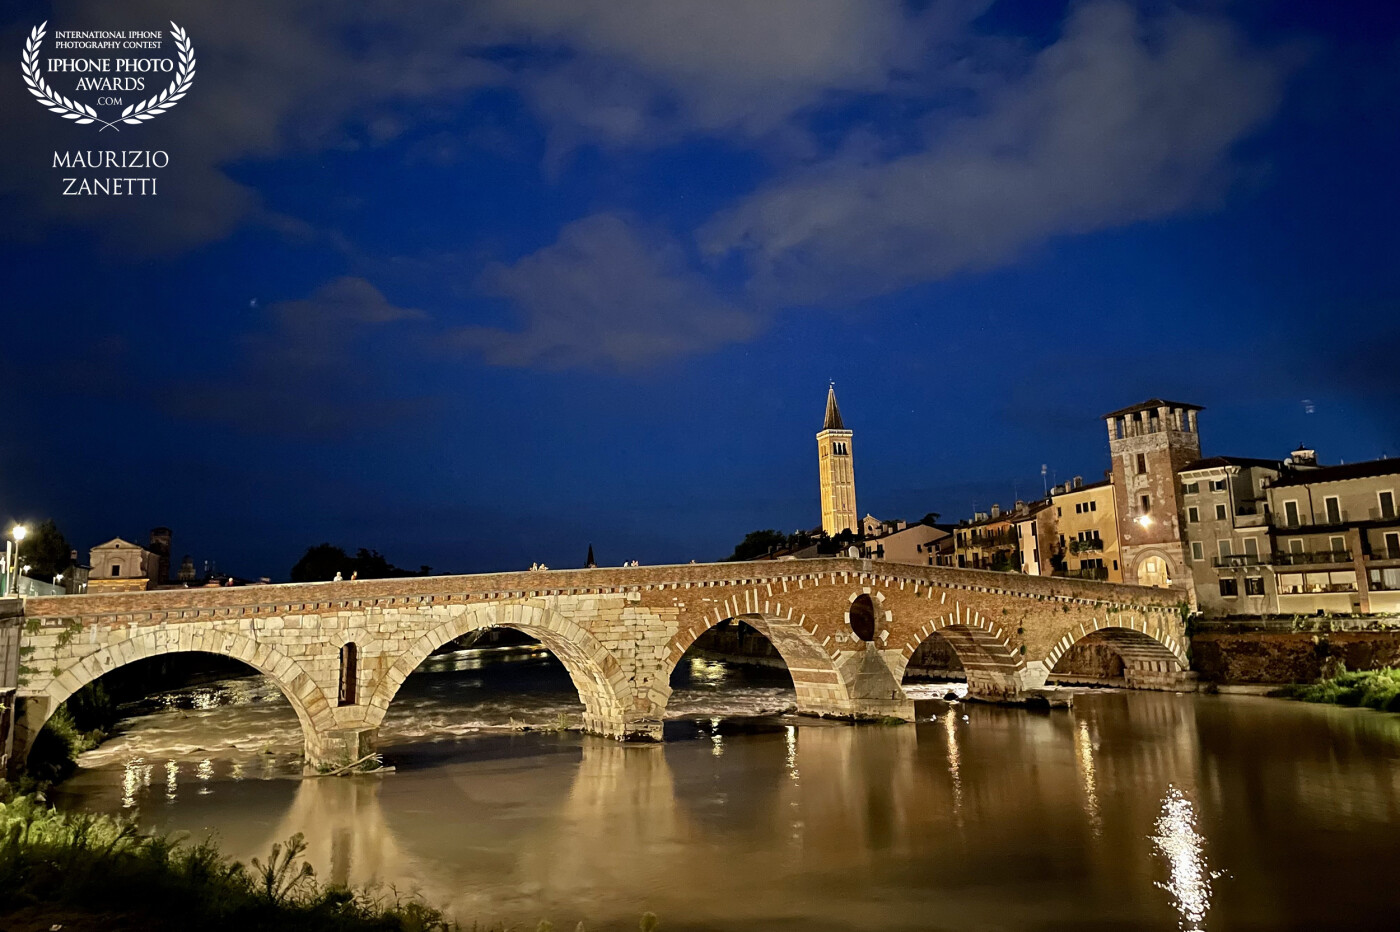 Ponte Pietra, in the wonderful Roman bridge of Verona, at the foot of the Roman Theater. When the night comes...